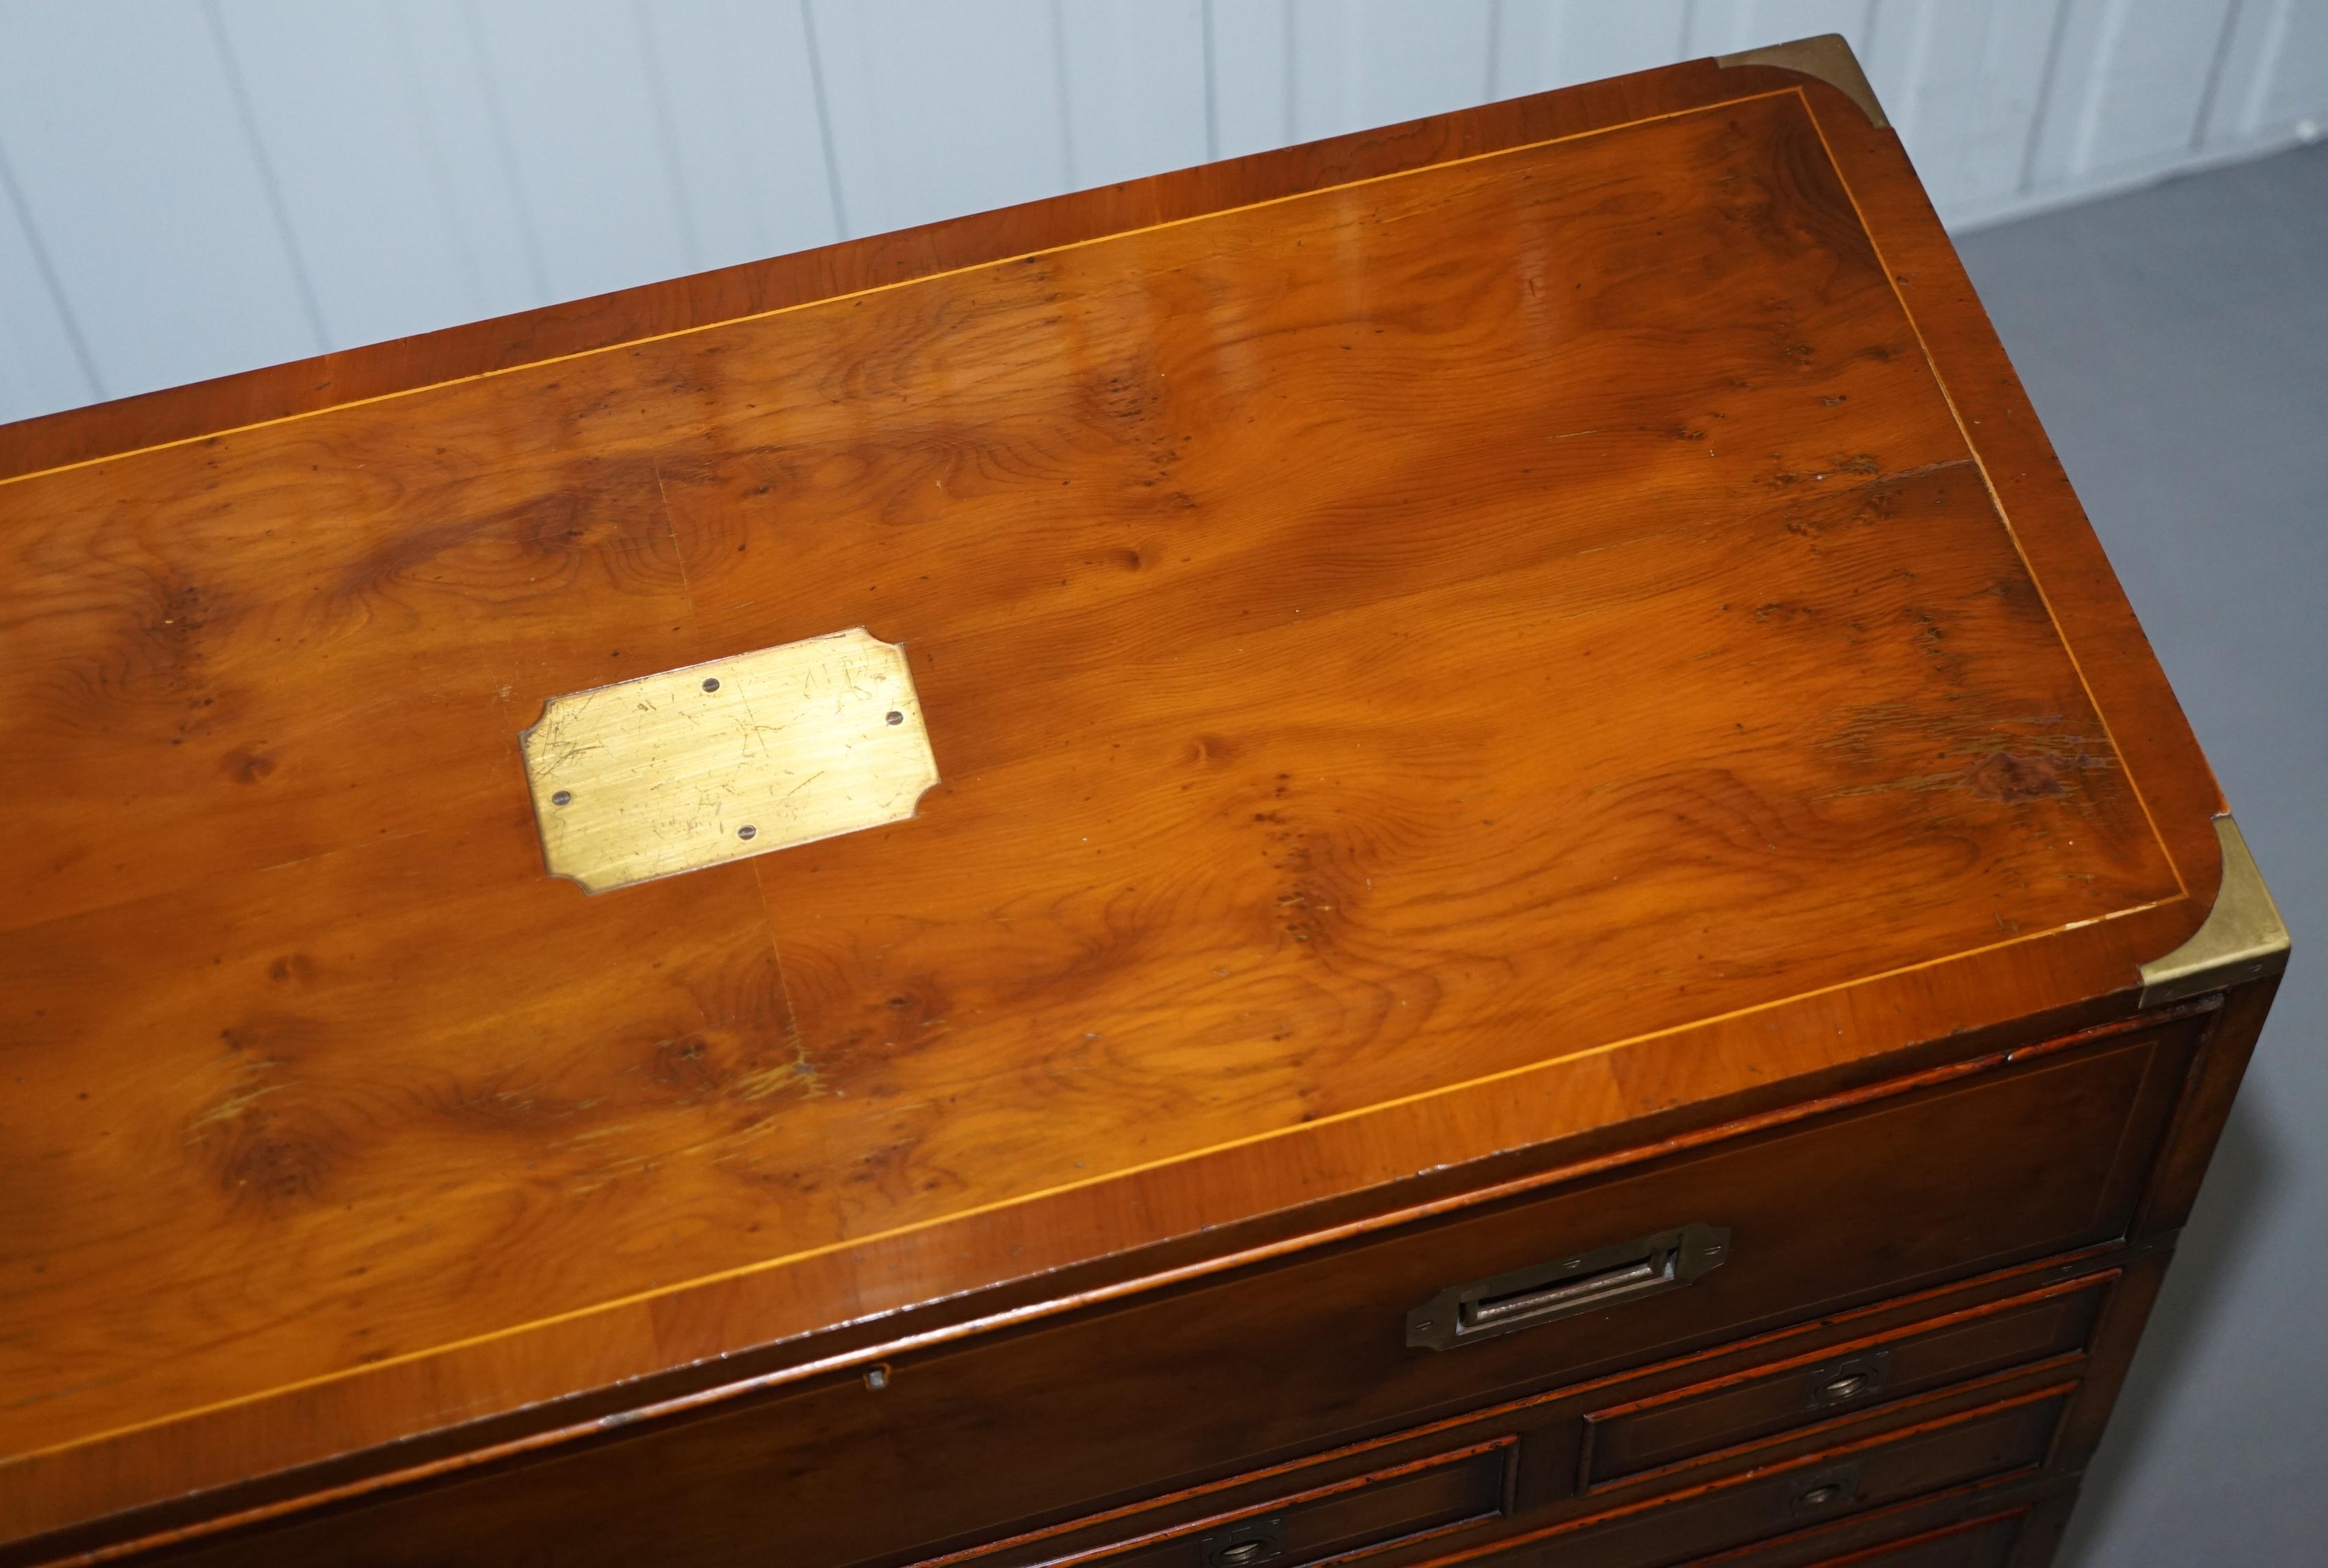 Lovely Burr Yew Wood Military Campaign Chest of Drawers Built in Drop Front Desk (20. Jahrhundert)